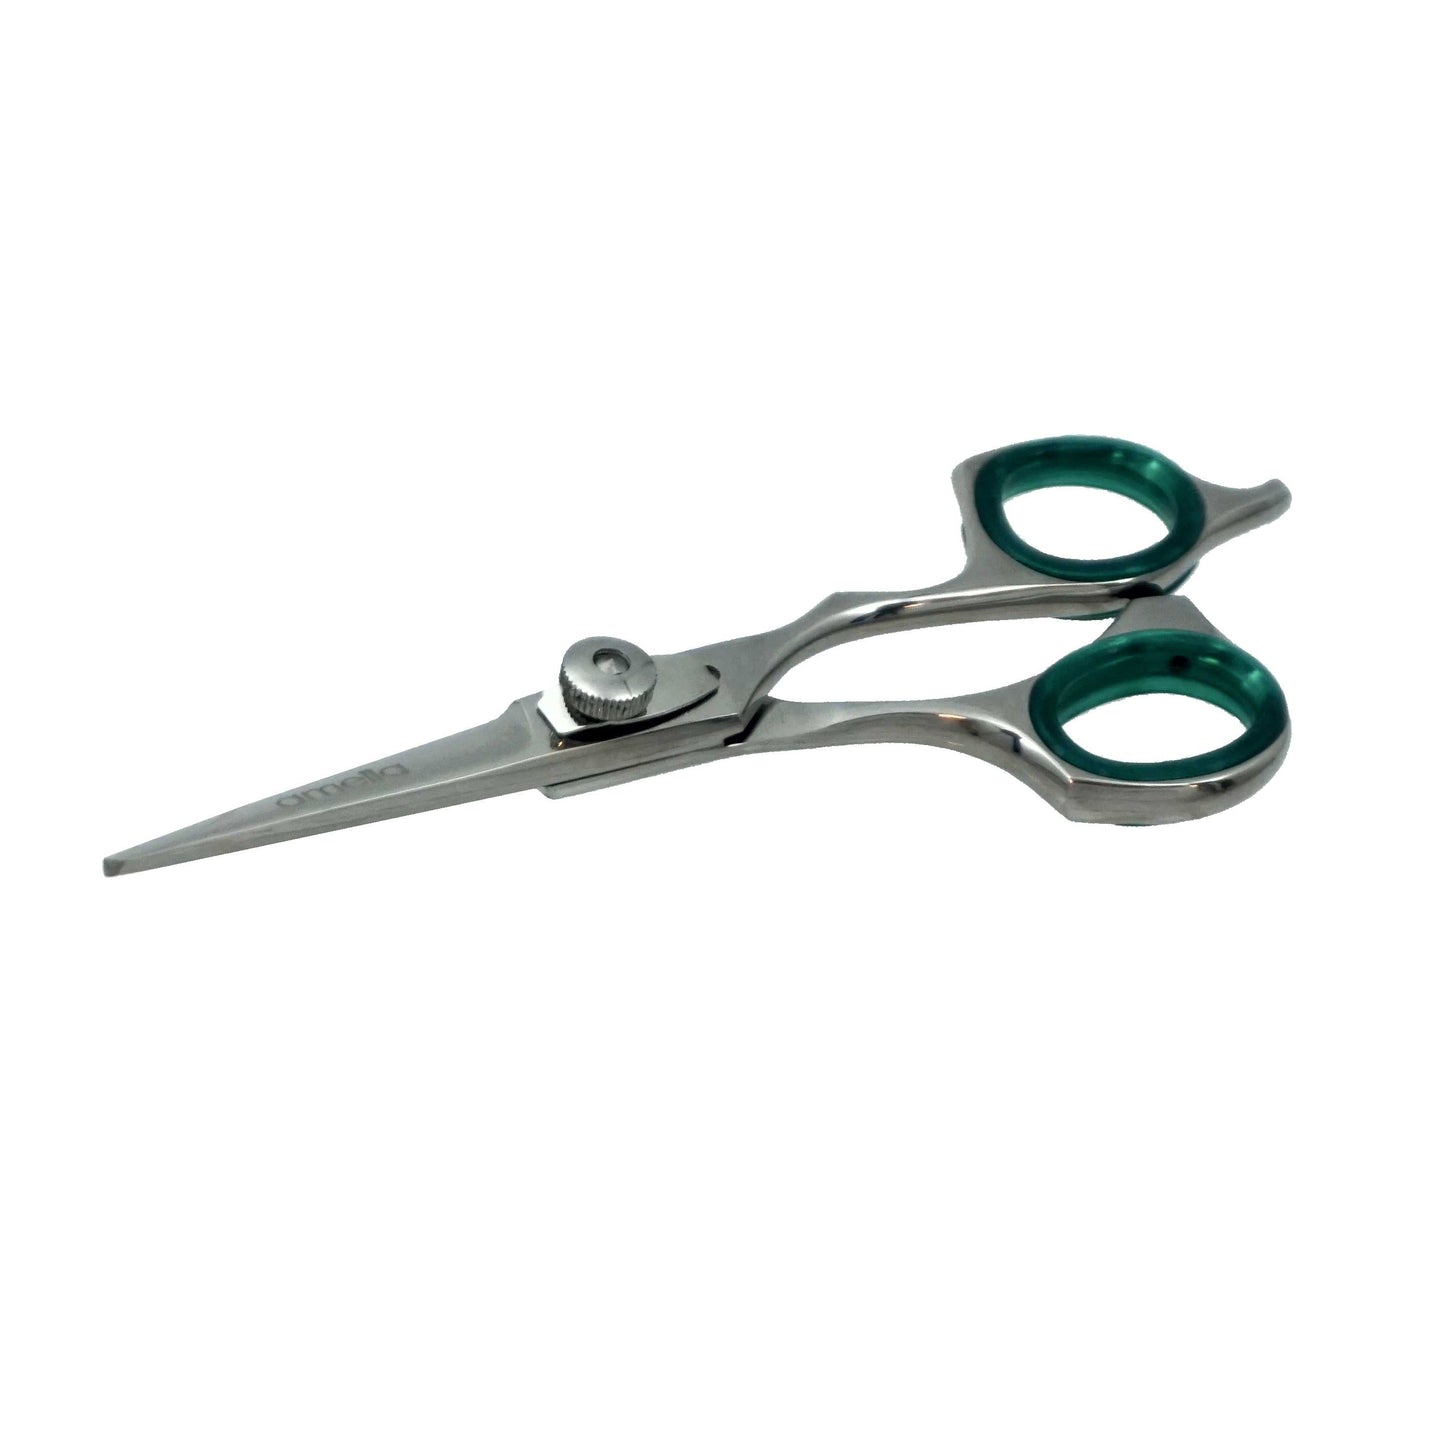 5" Right Handed, Stainless Steel Professional Shear, Fixed Finger Rest